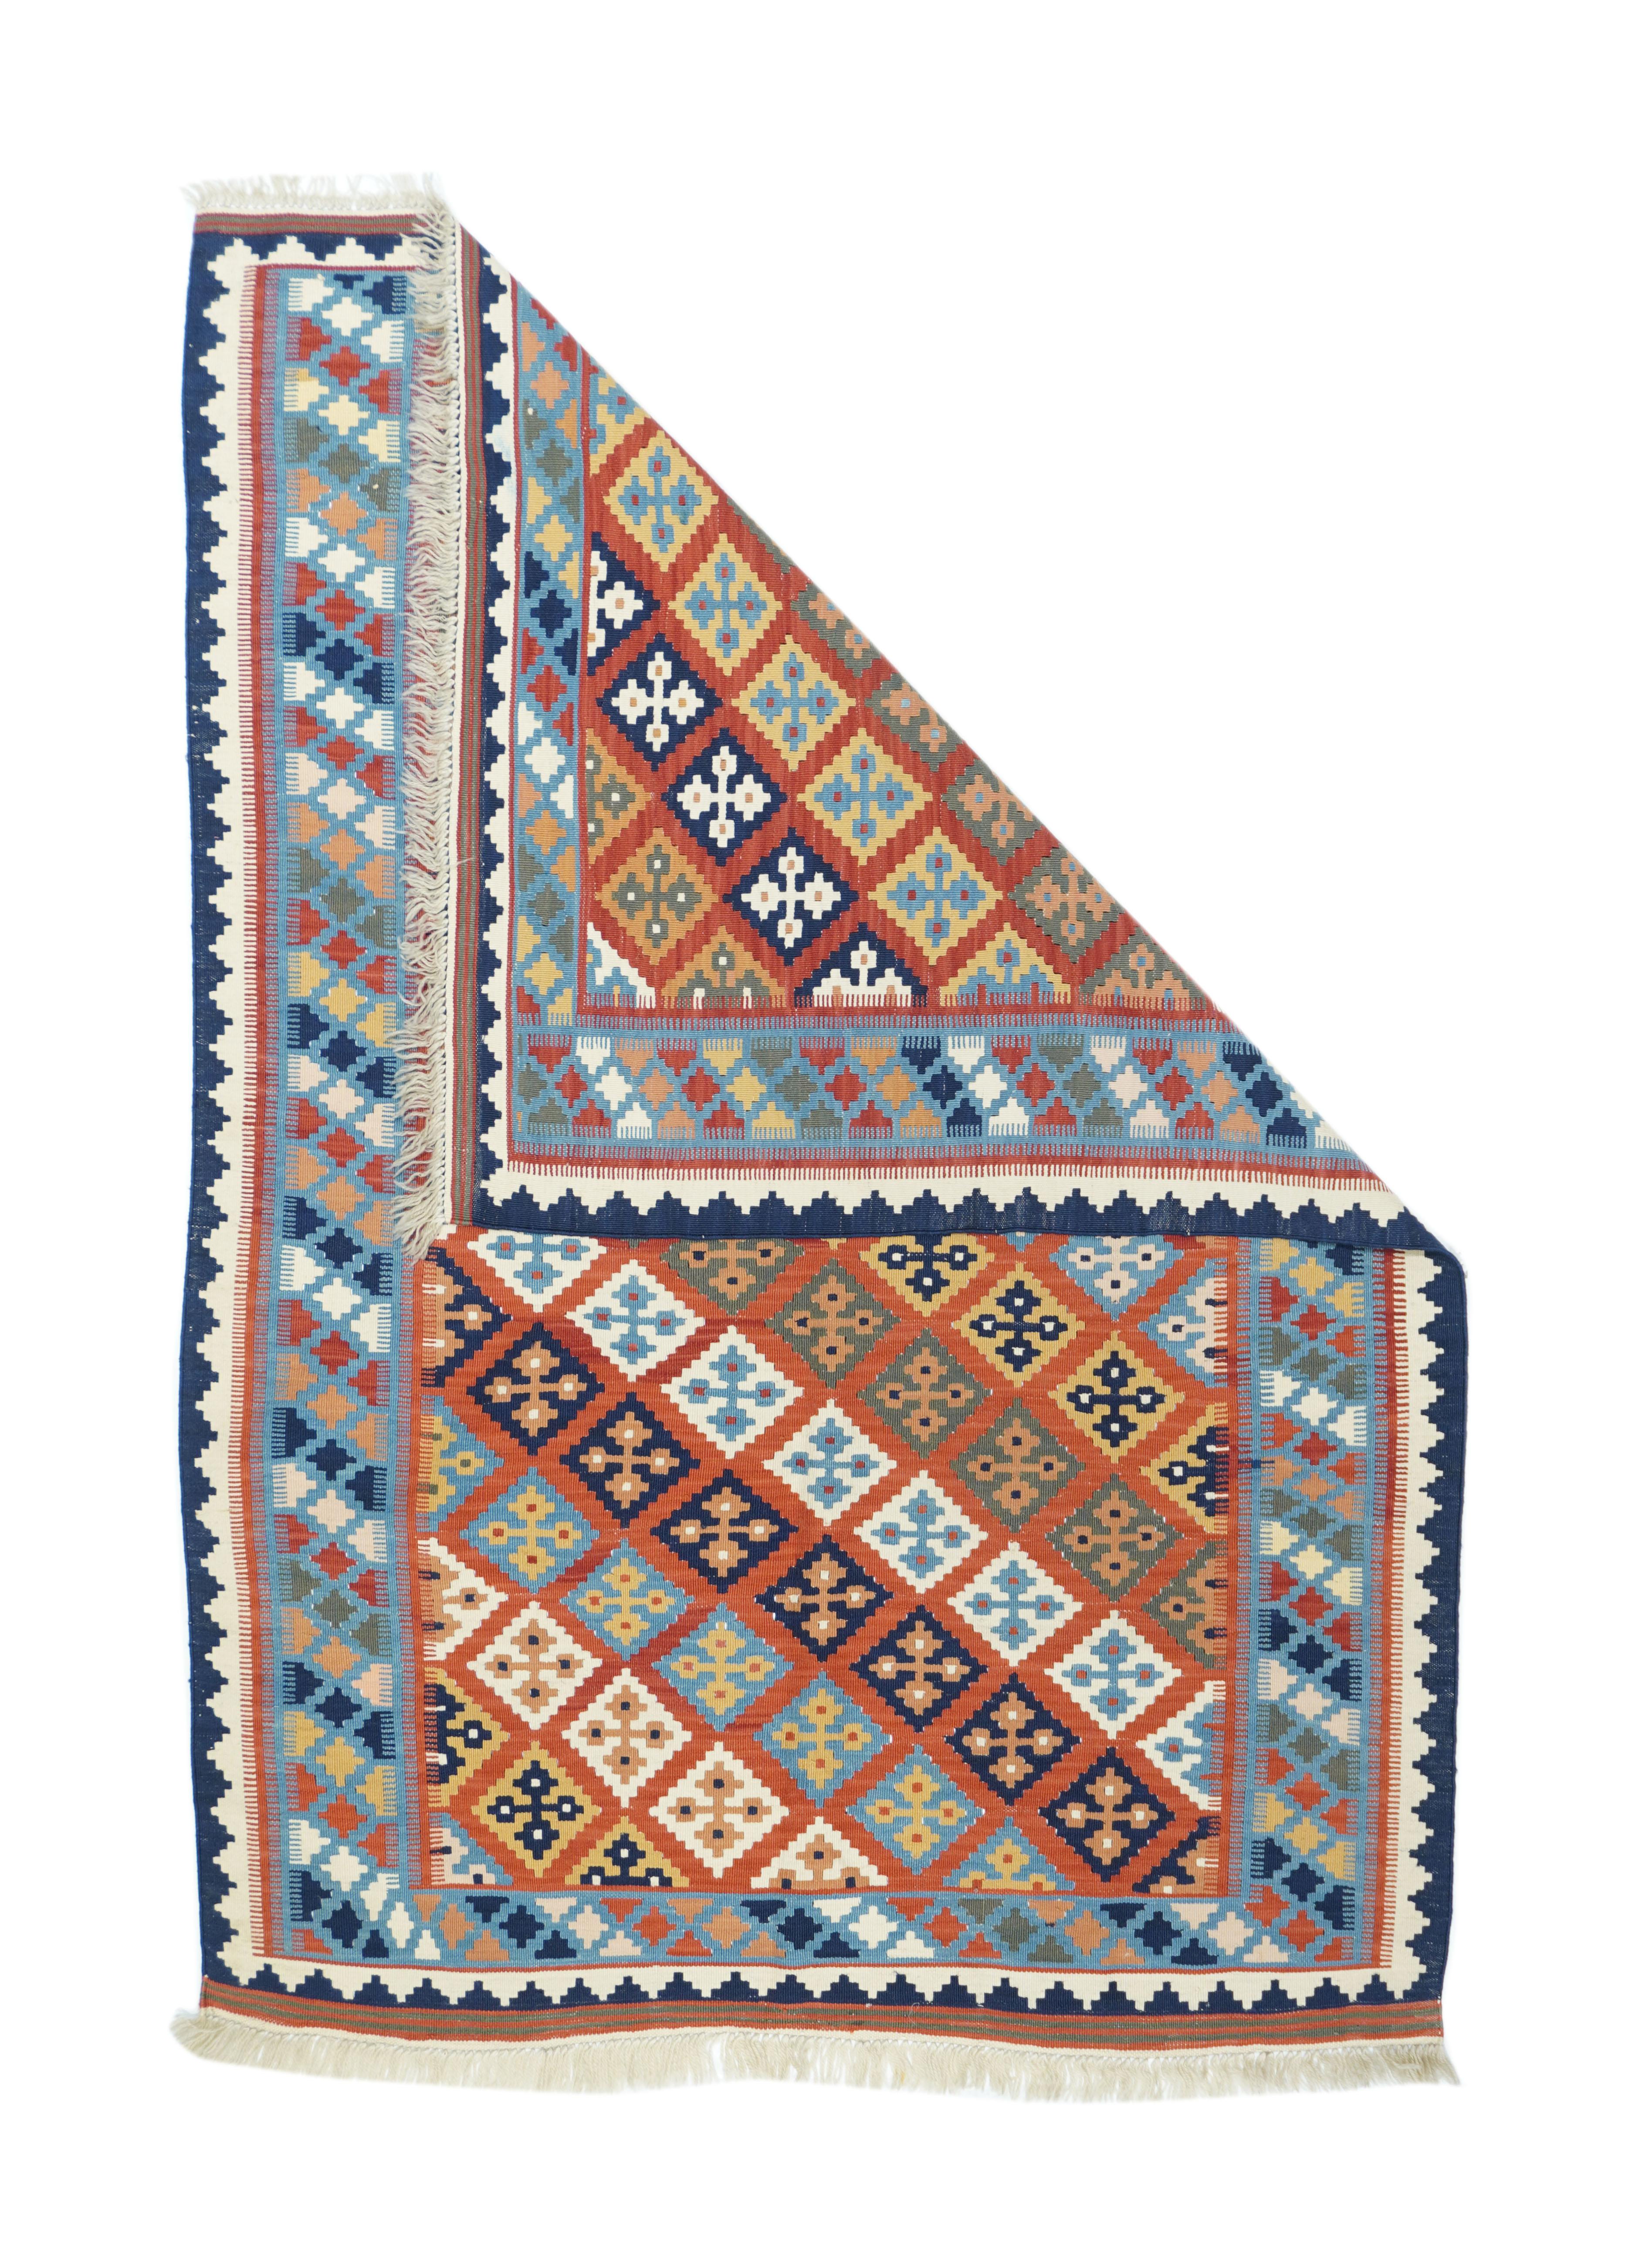 Vintage Kilim rug 3'10'' x 5'6''. Looks SW Persian, with a rust-red field displaying color diagonals of disjpoint diamonds in ecru, teal, dark blue and straw. Comb edges at border color joins. Light blue border of oblique color lines of small